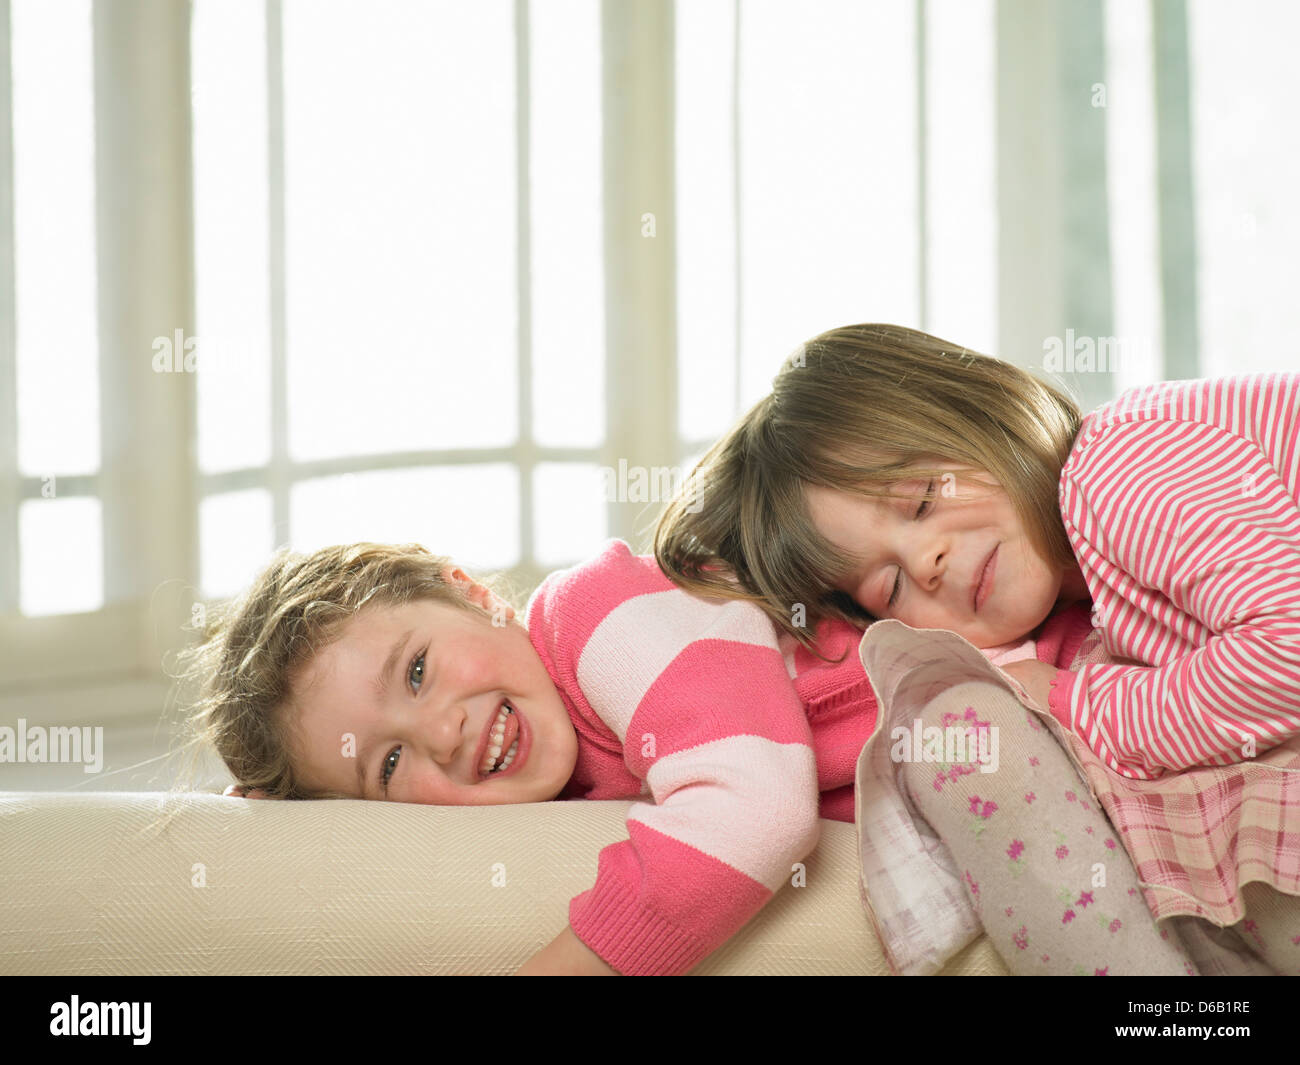 Girls playing together indoors Stock Photo